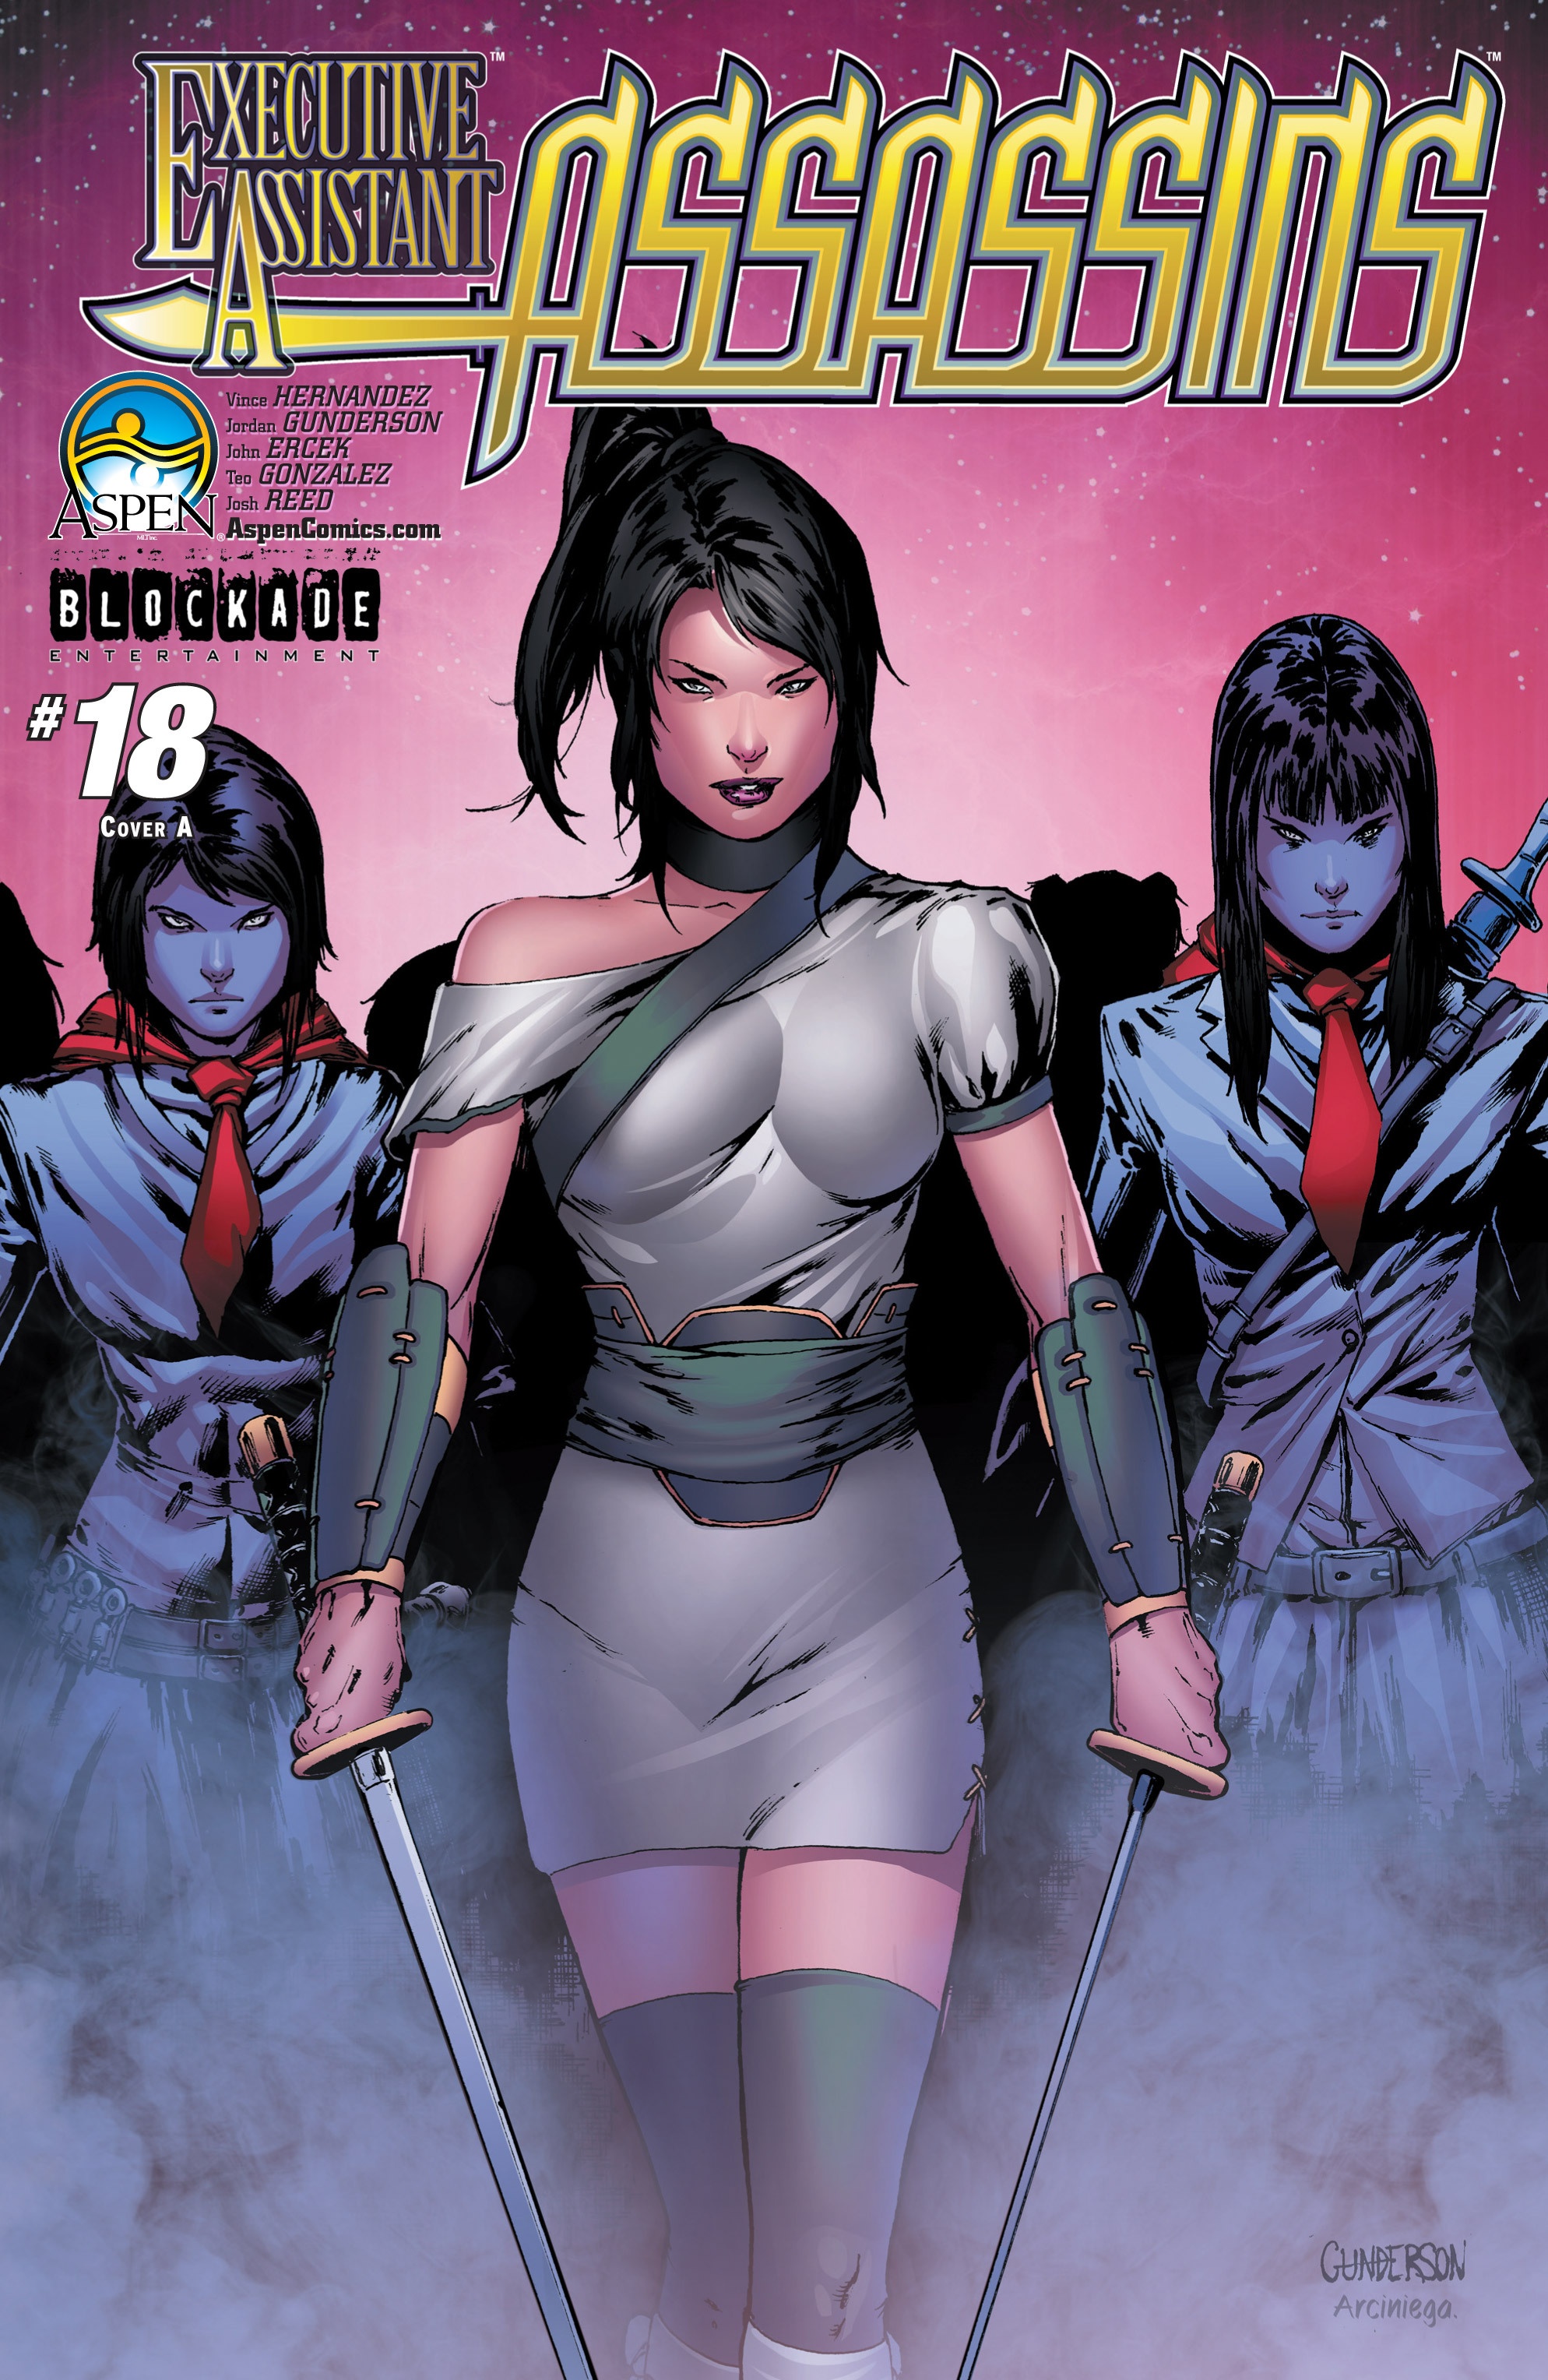 Read online Executive Assistant: Assassins comic -  Issue #18 - 1